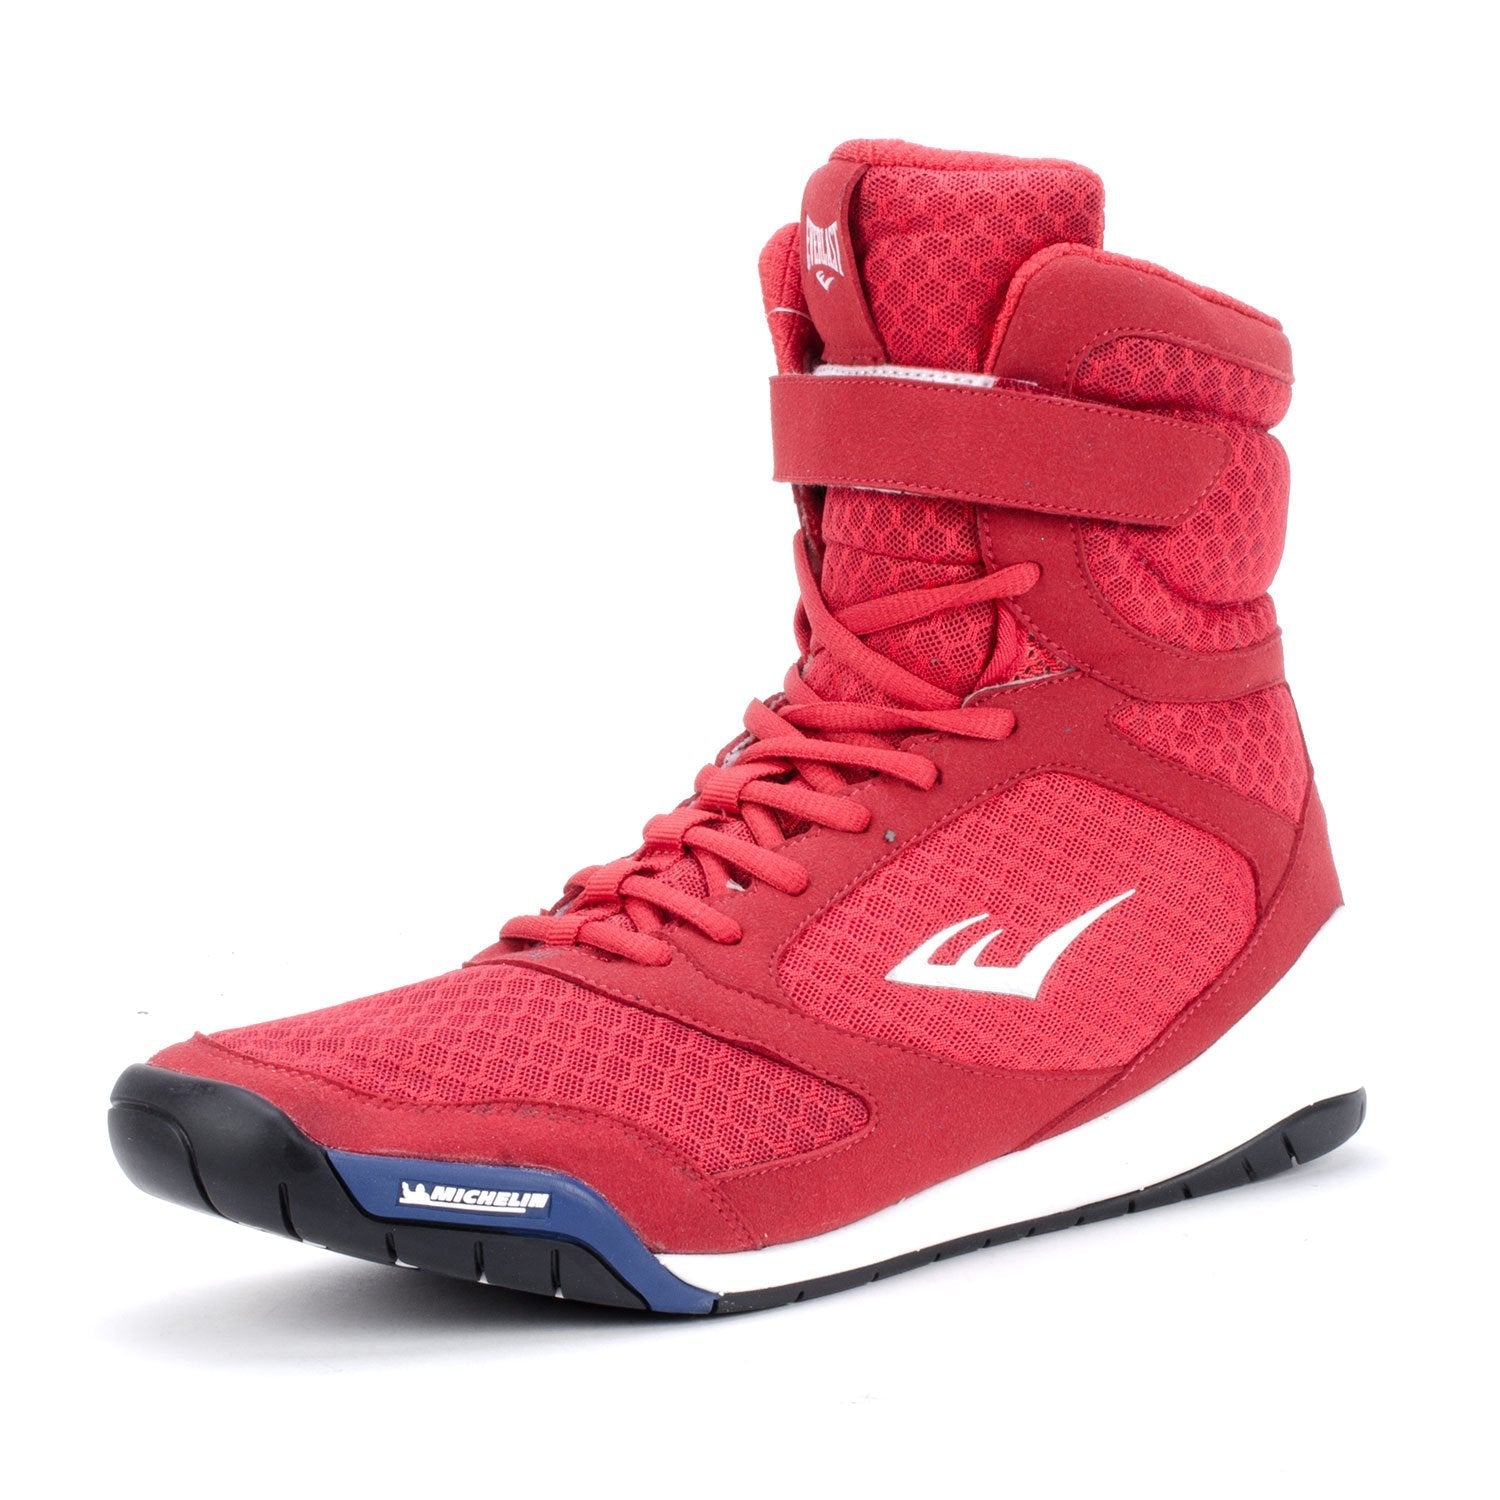 Everlast | Elite High Top Boxing Shoe - XTC Fitness - Exercise Equipment Superstore - Canada - Fight Shoes